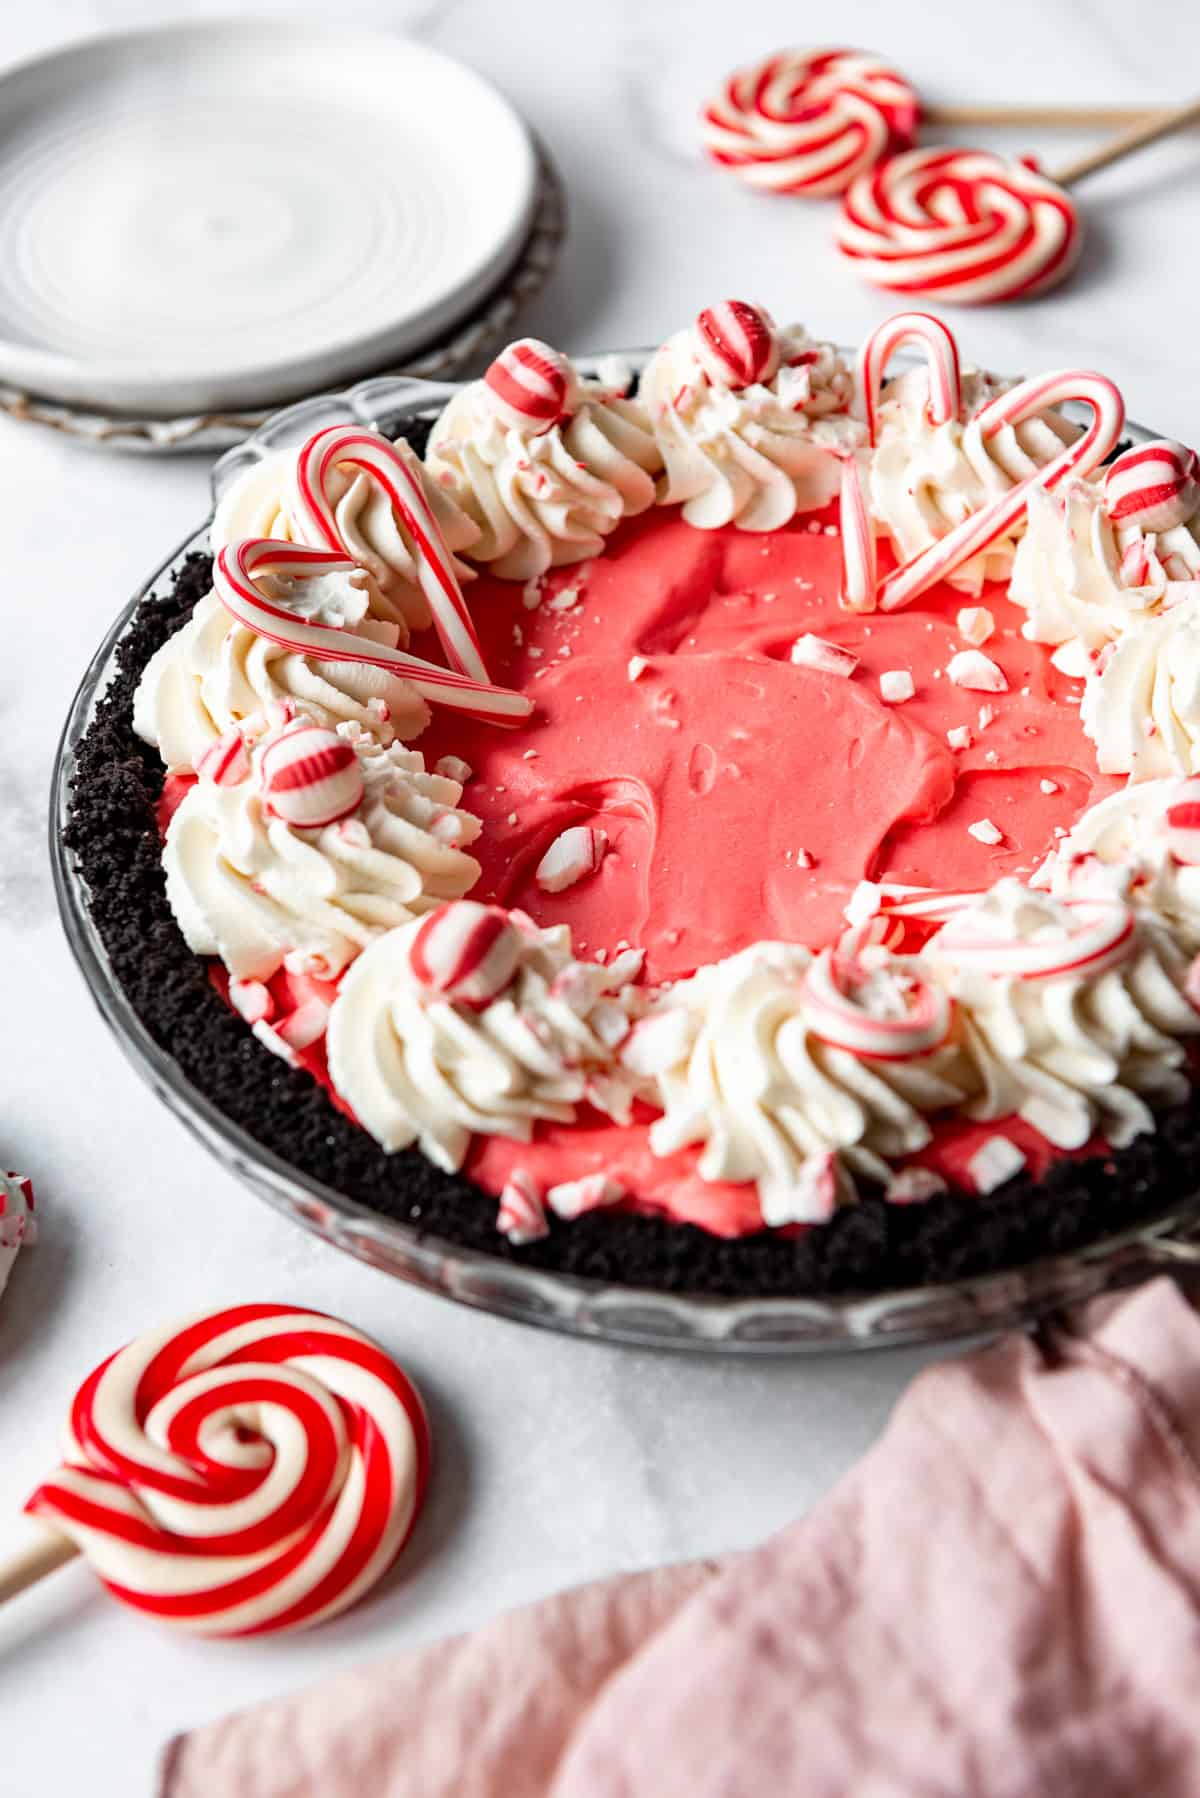 A no-bake peppermint cheesecake with an Oreo crust topped with whipped cream and candy canes.